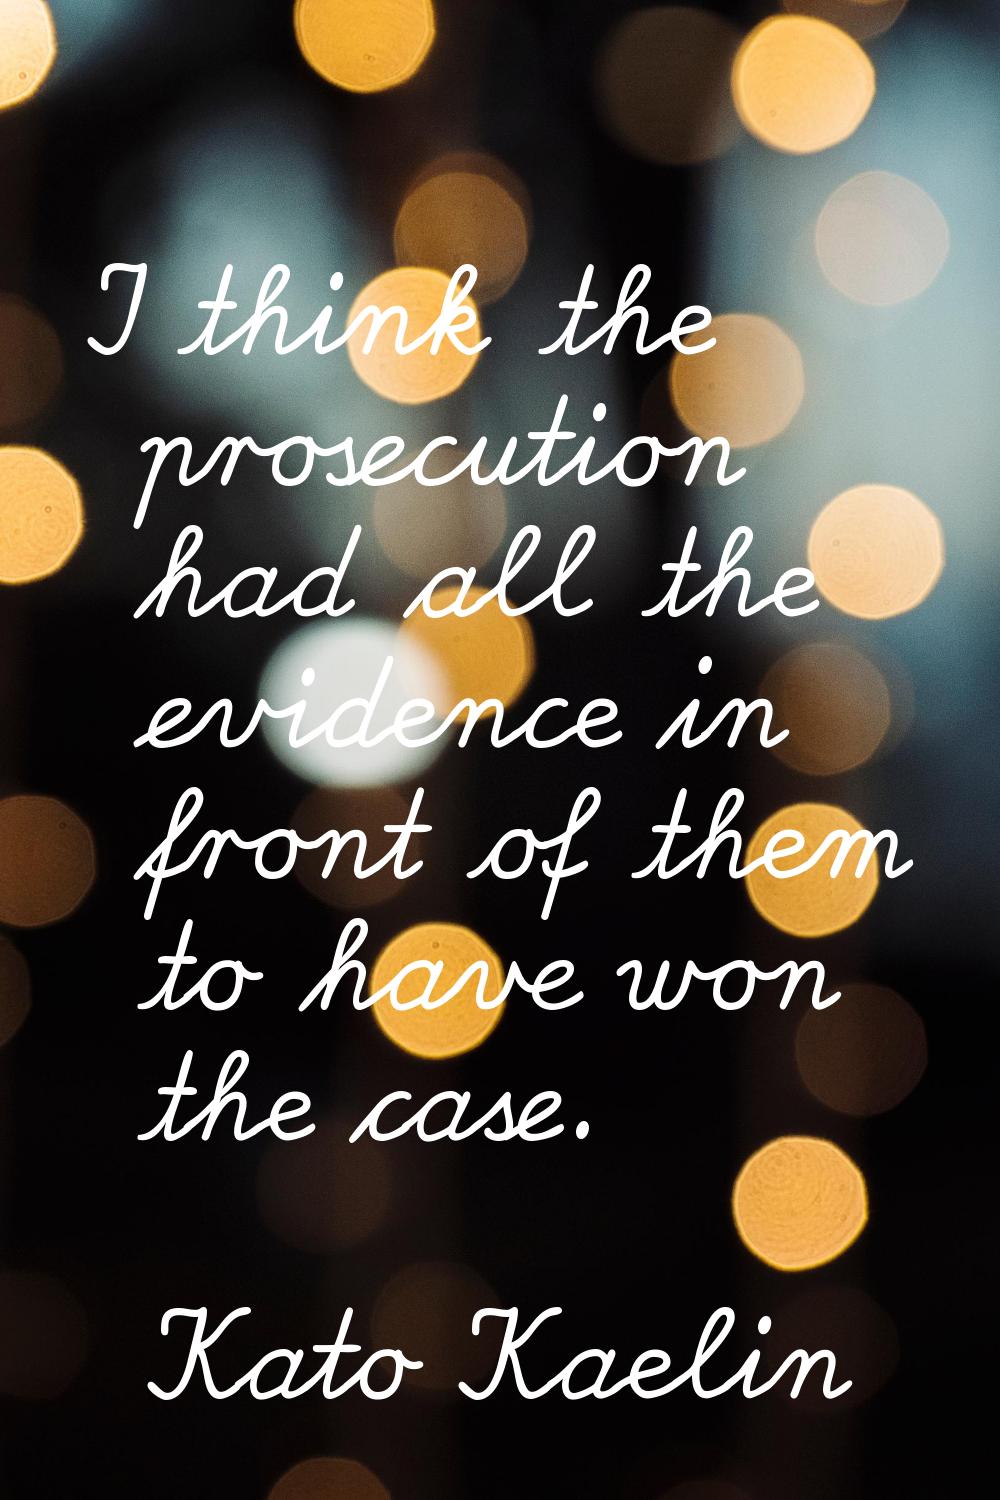 I think the prosecution had all the evidence in front of them to have won the case.